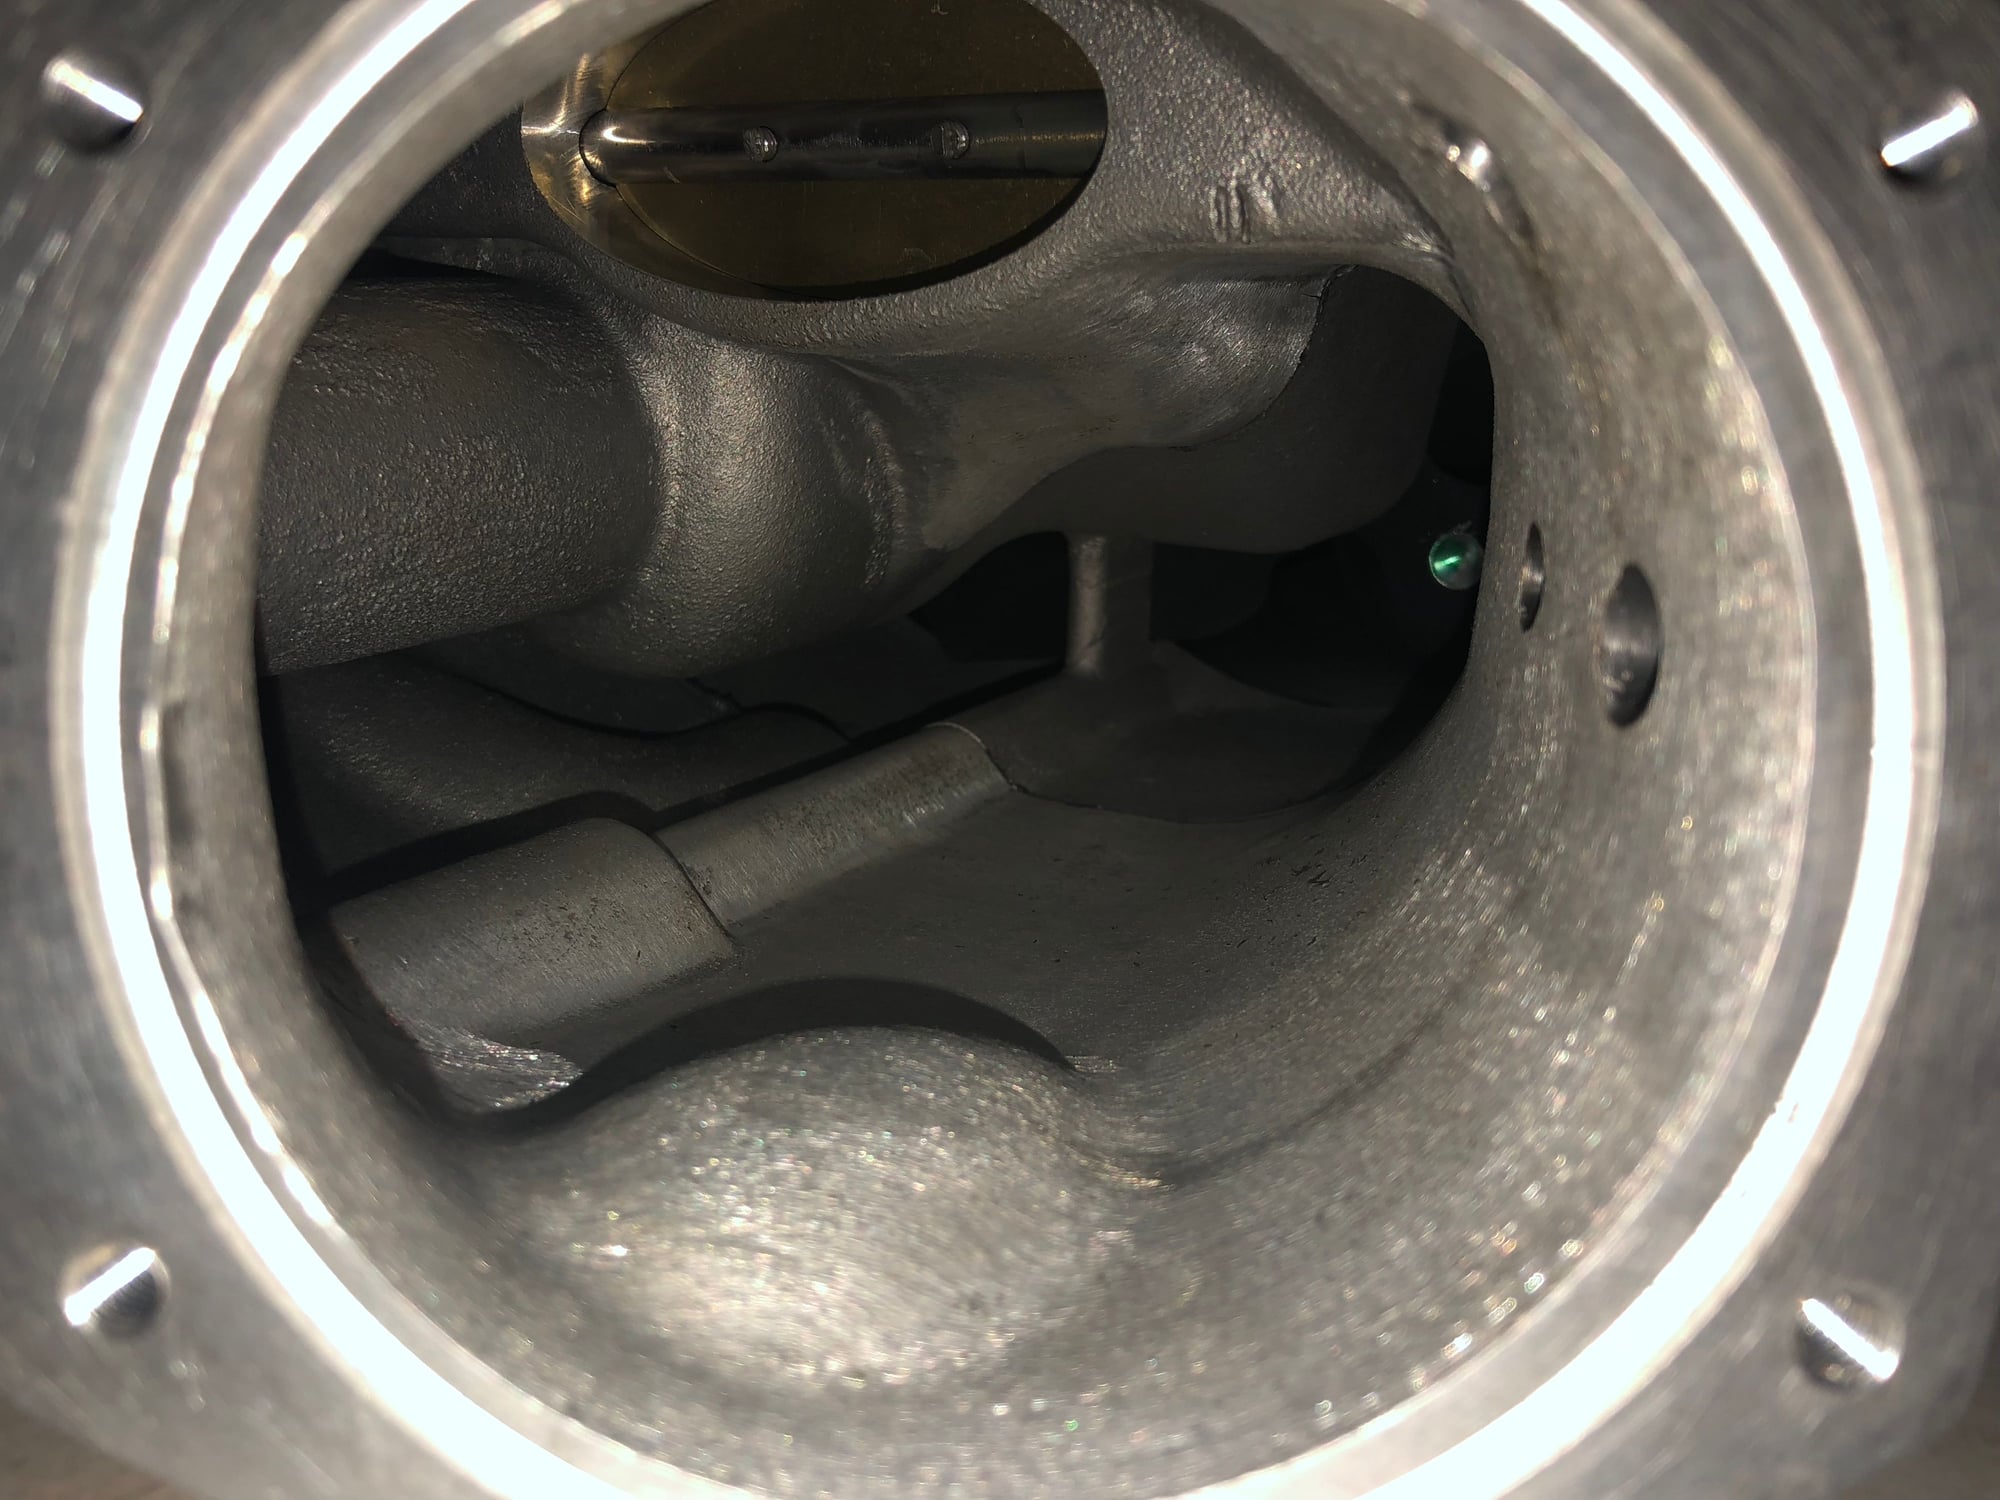  - LS9 supercharger with LPE LSA snout - Long Beach, CA 90802, United States